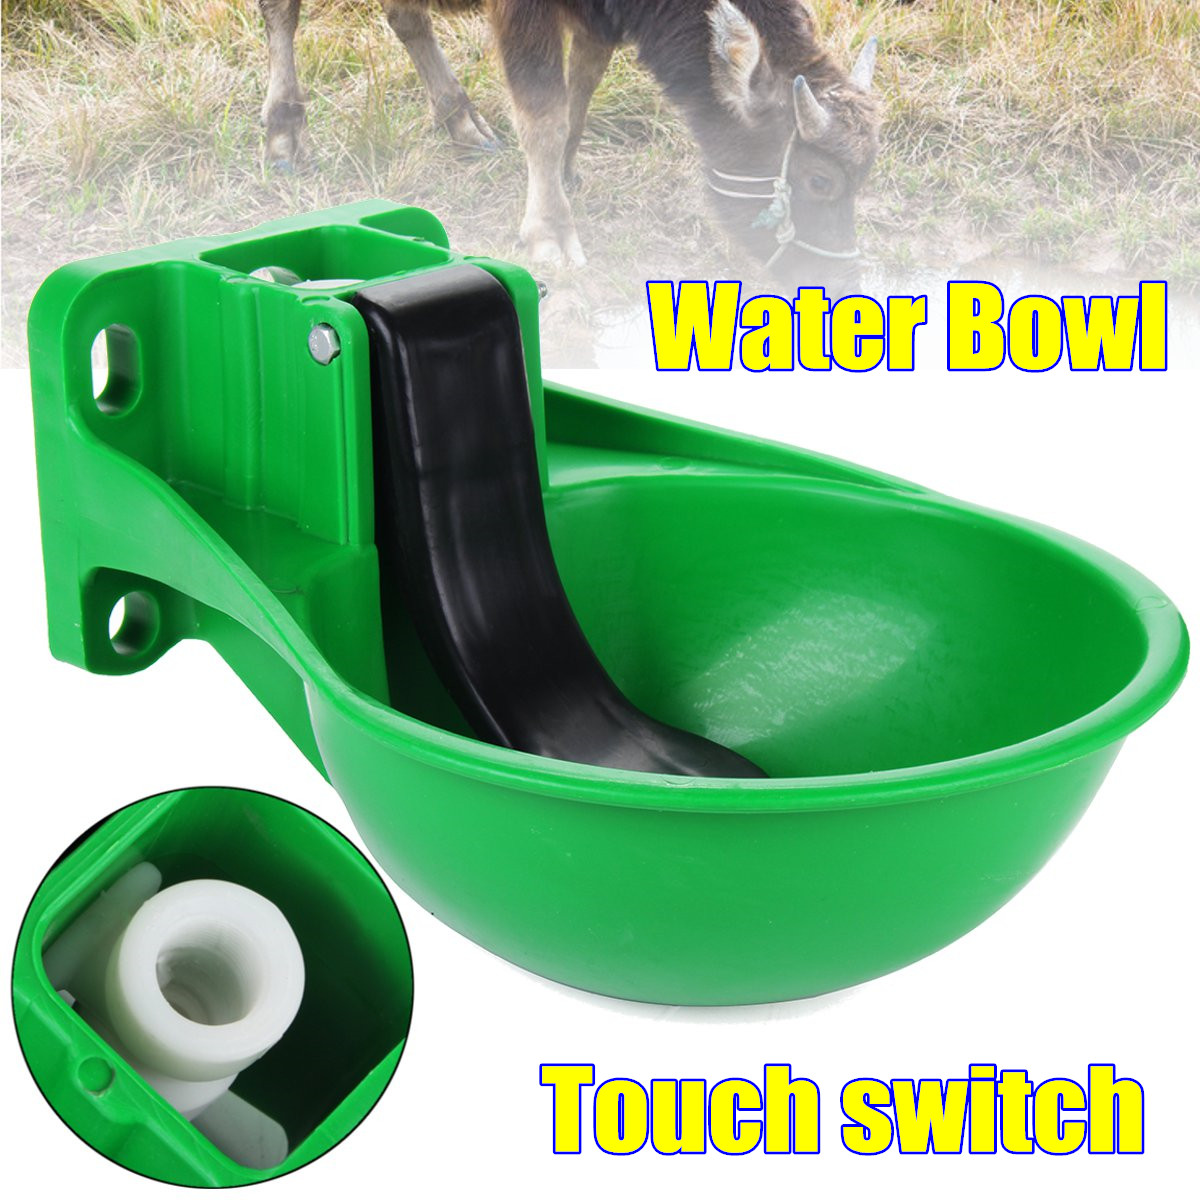 Large-Automatic-Touch-Switch-Water-Bowl-Bottle-Dispenser-Farm-Cow-Horse-Drinking-Waterer-1385253